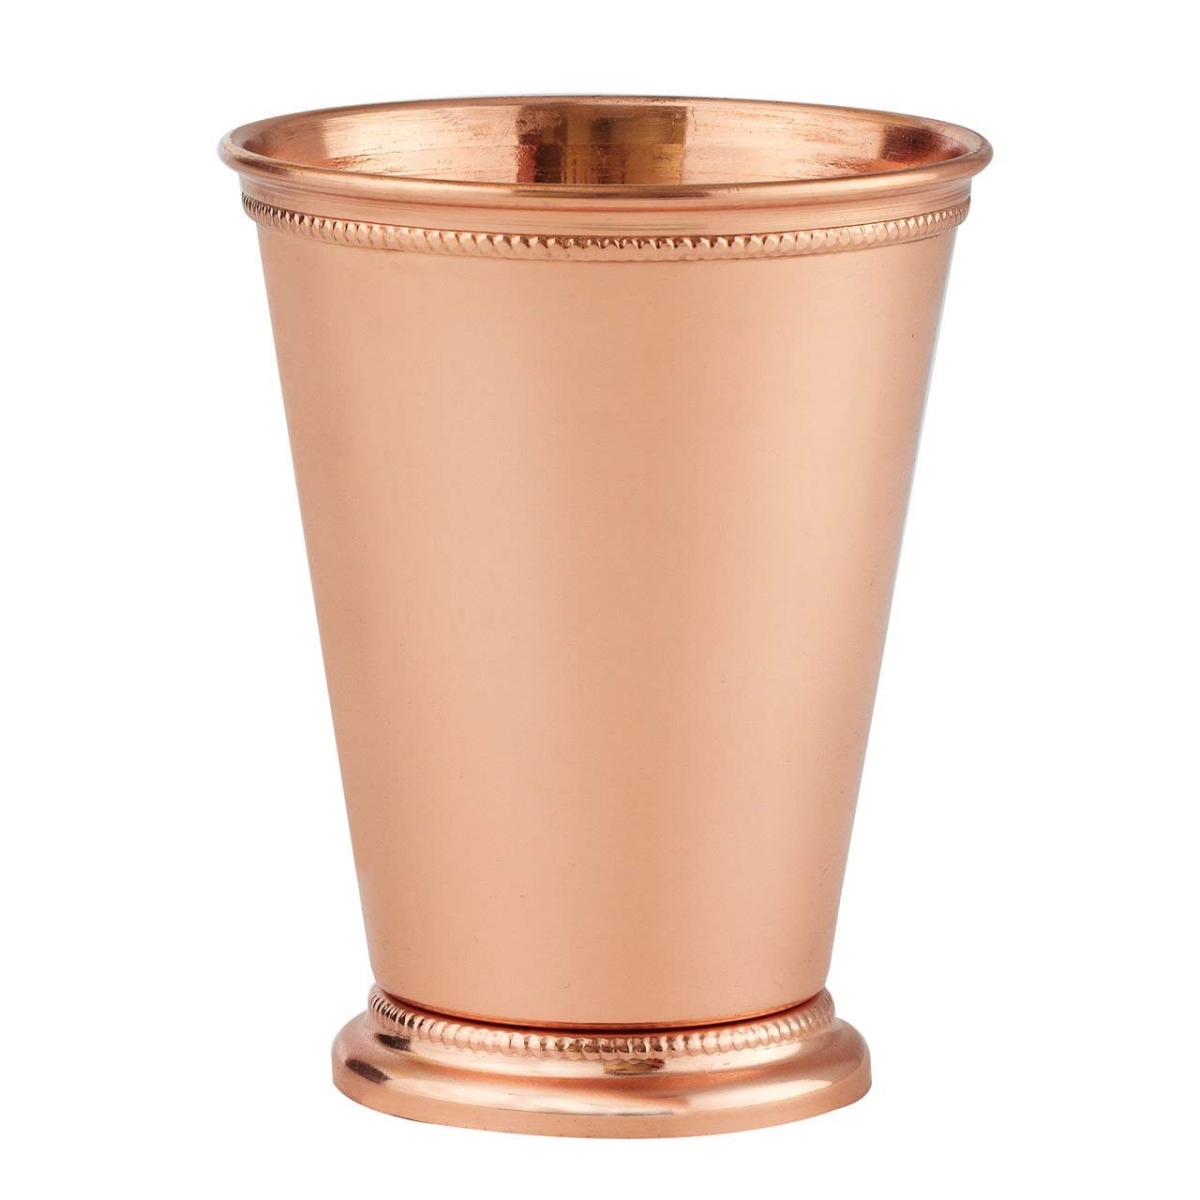 90481 4.5 In. & 12 Oz Copper Plated Mint Julep Cup